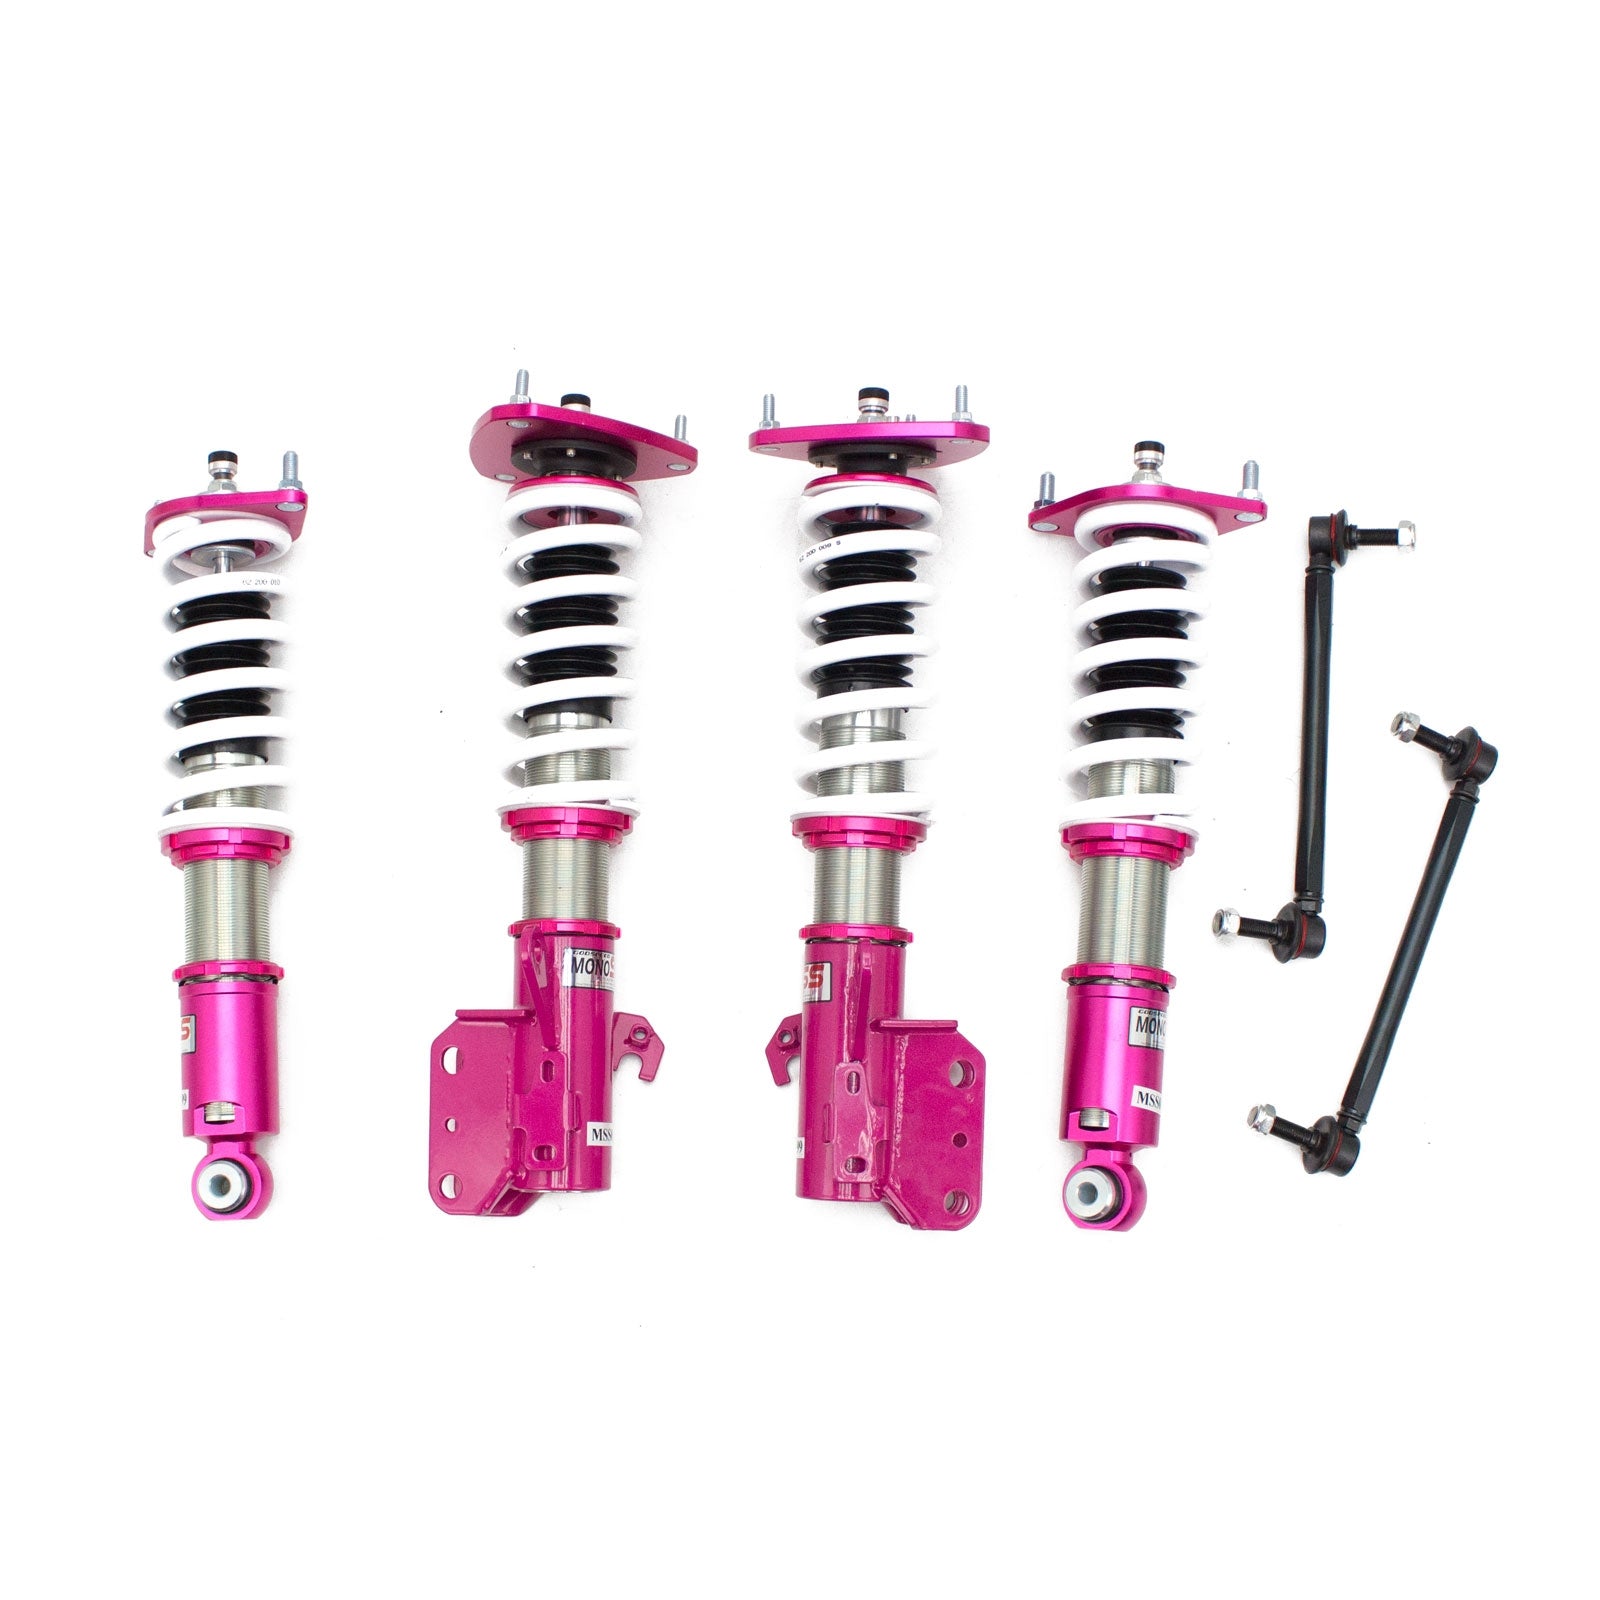 Godspeed(MSS0199) MonoSS Coilover Lowering Kit, Fully Adjustable, Ride Height, Spring Tension And 16 Click Damping